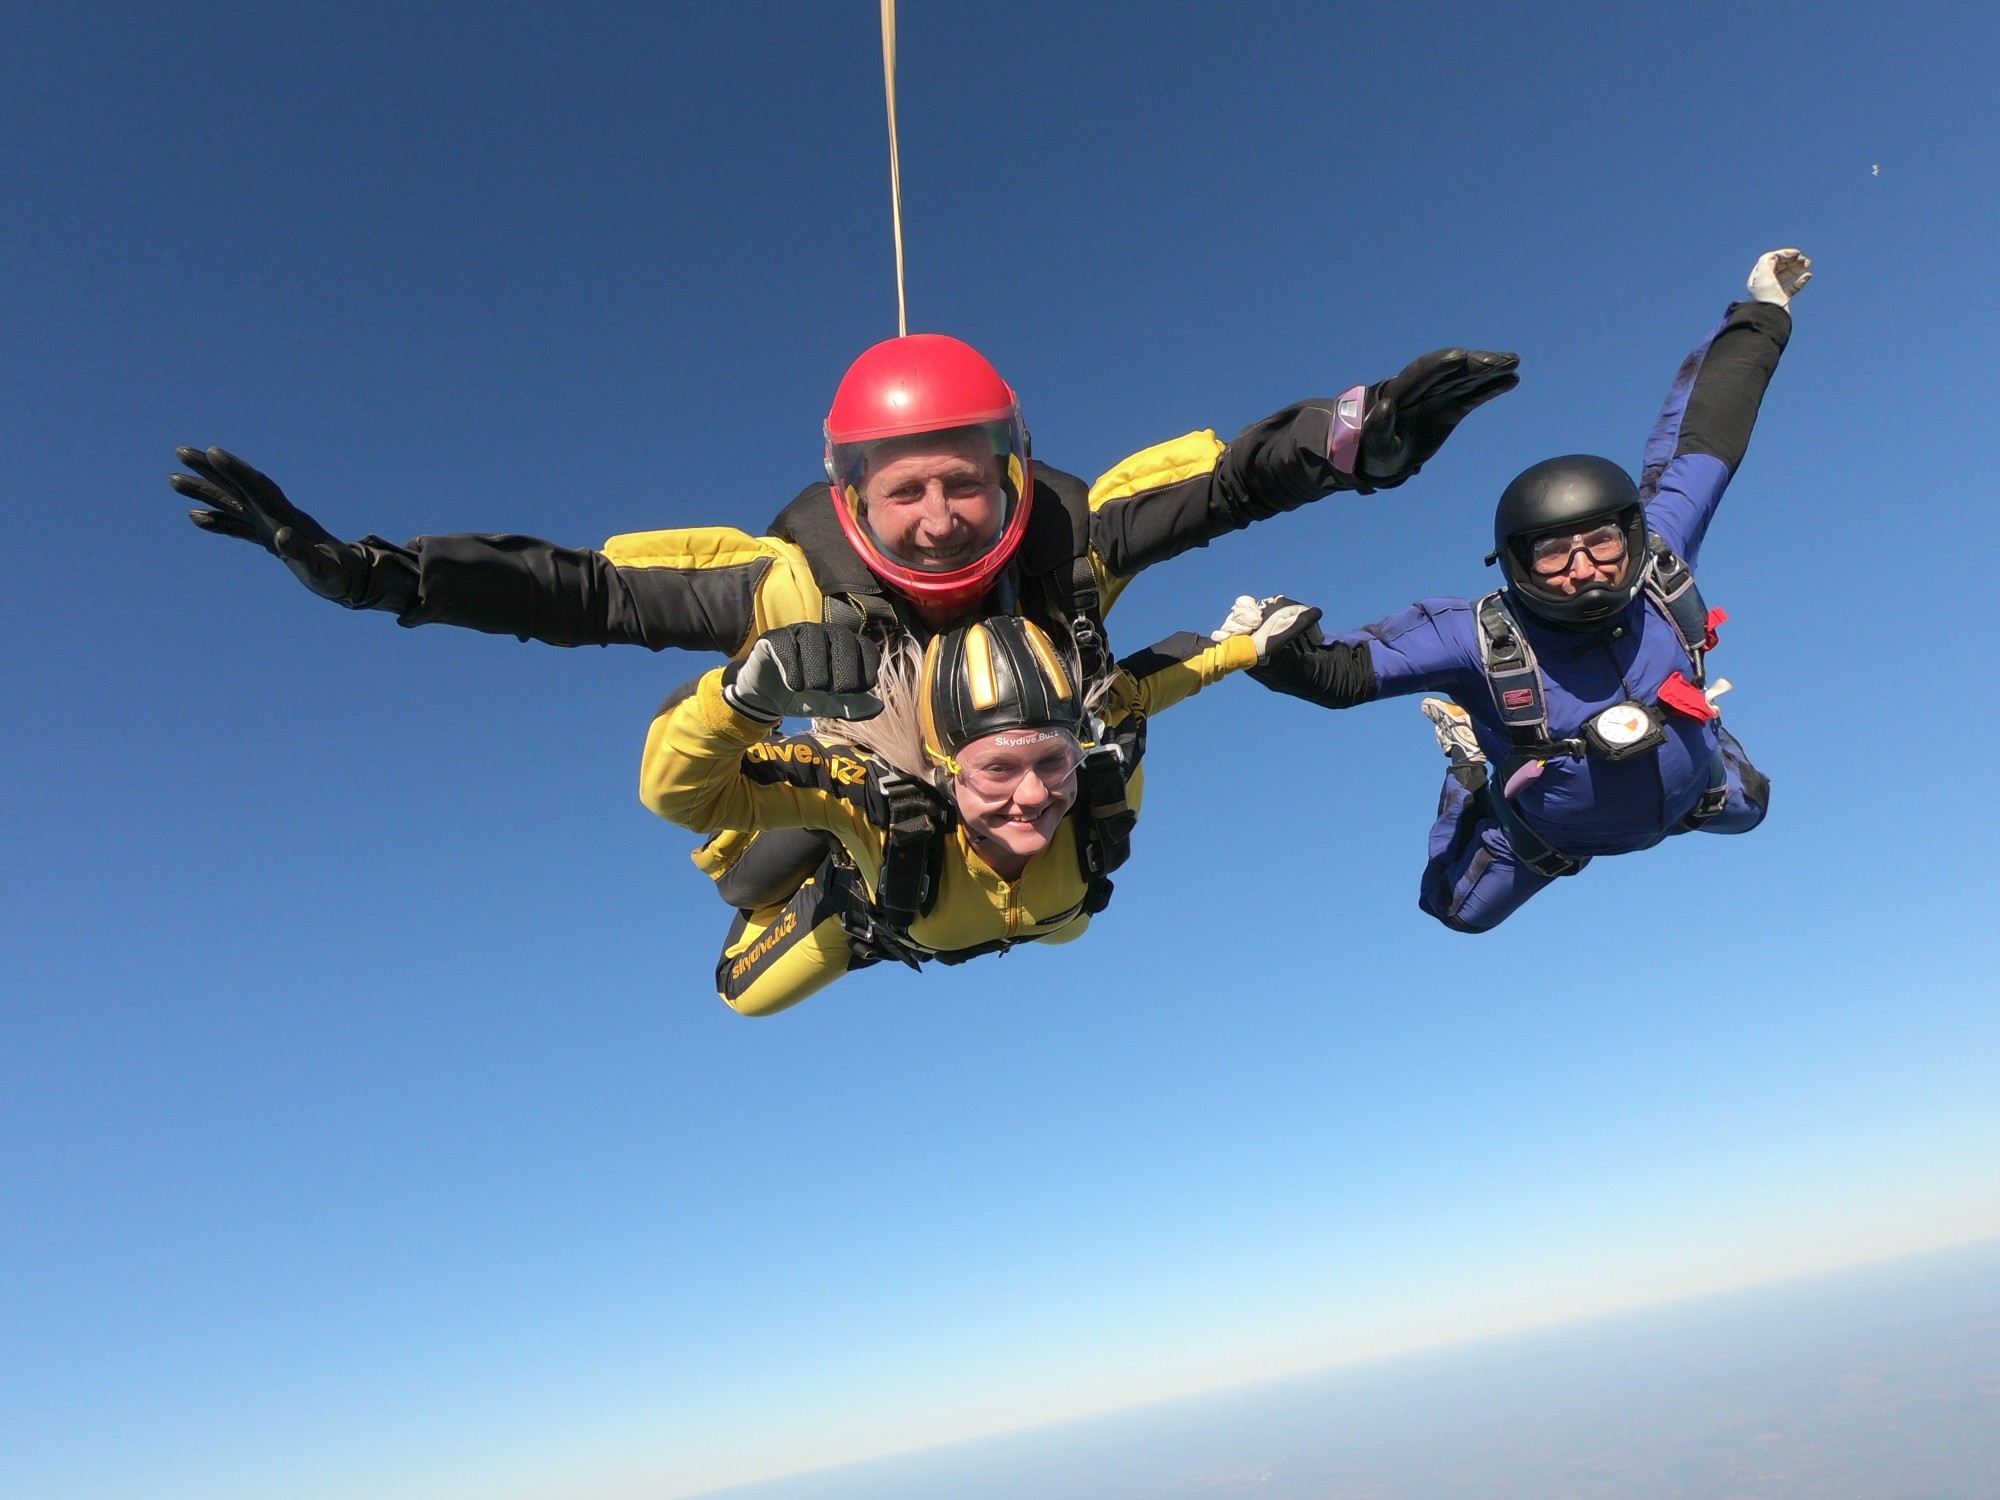 Skydivers have raised over £5,000